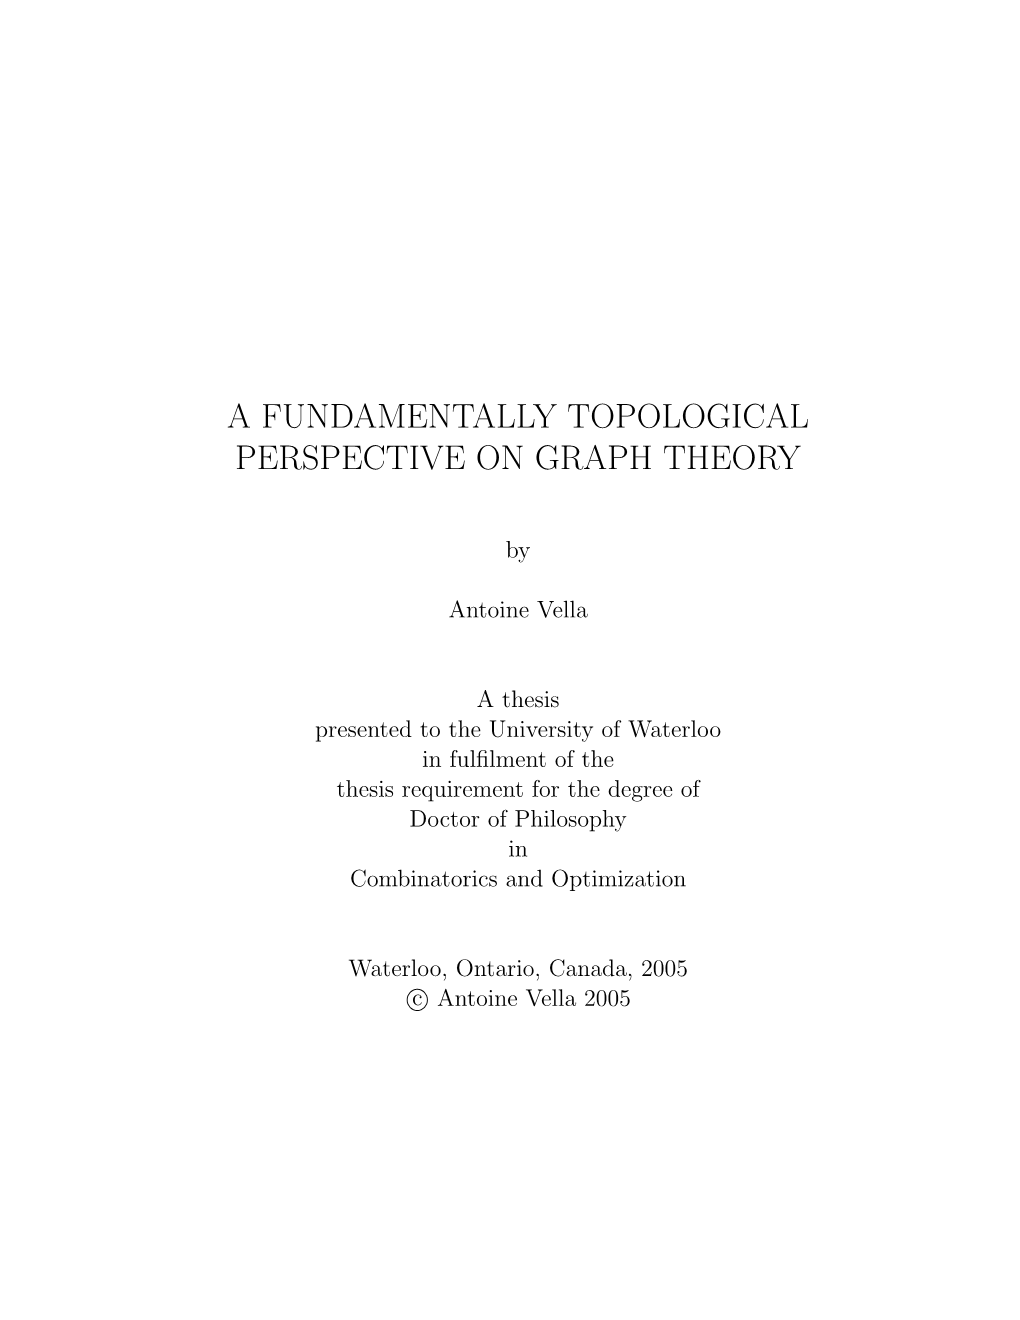 A Fundamentally Topological Perspective on Graph Theory